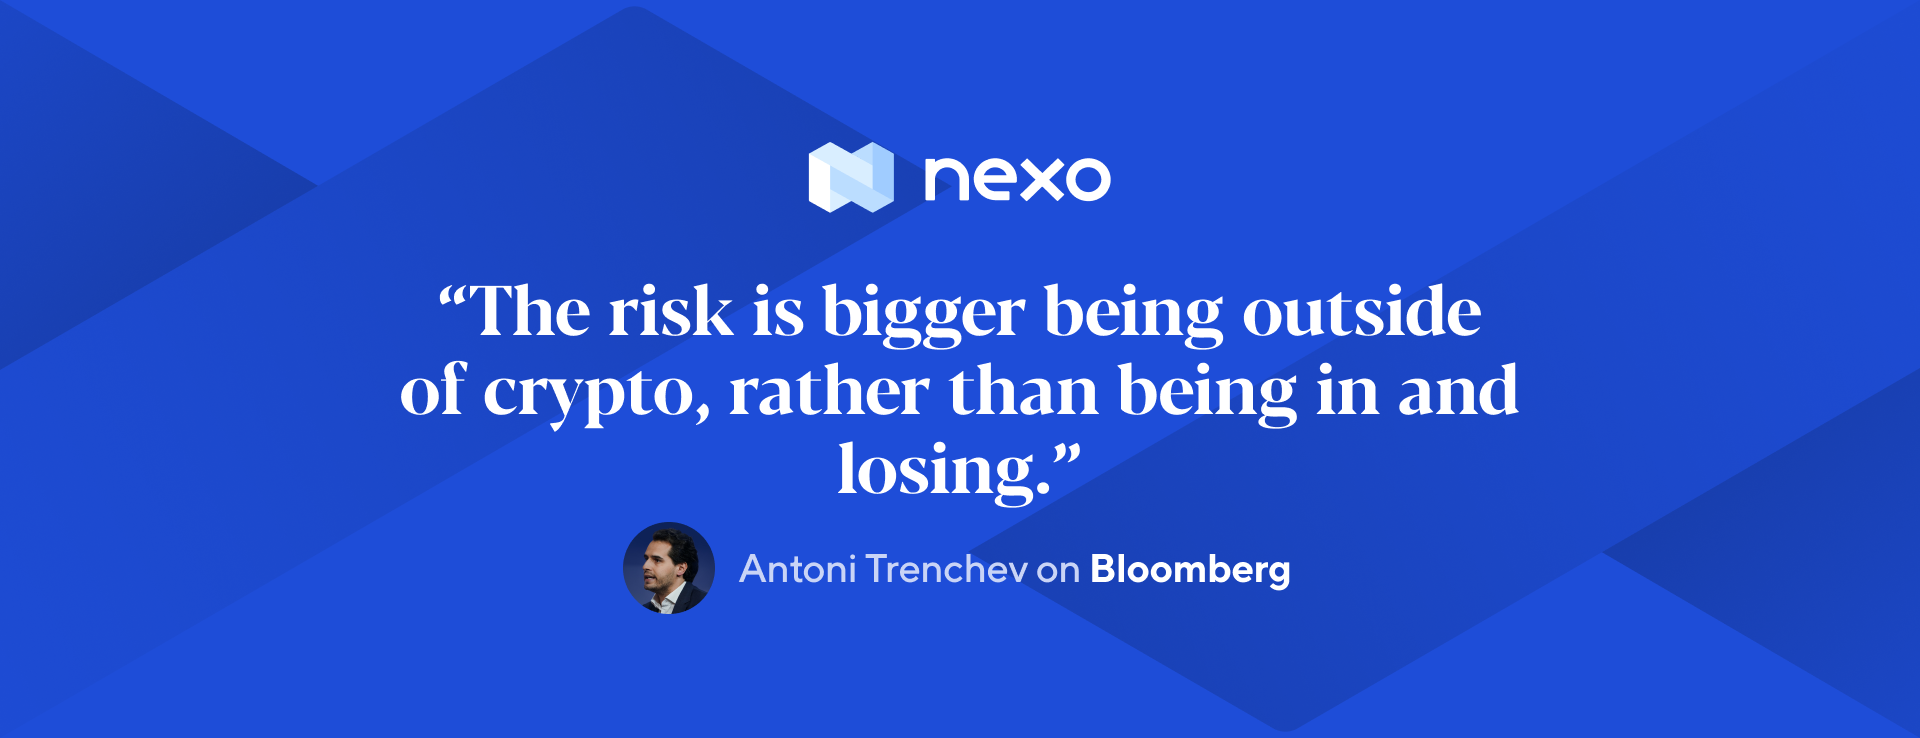 The Risk Is Bigger Being Outside of Crypto, Rather Than Being in and Losing